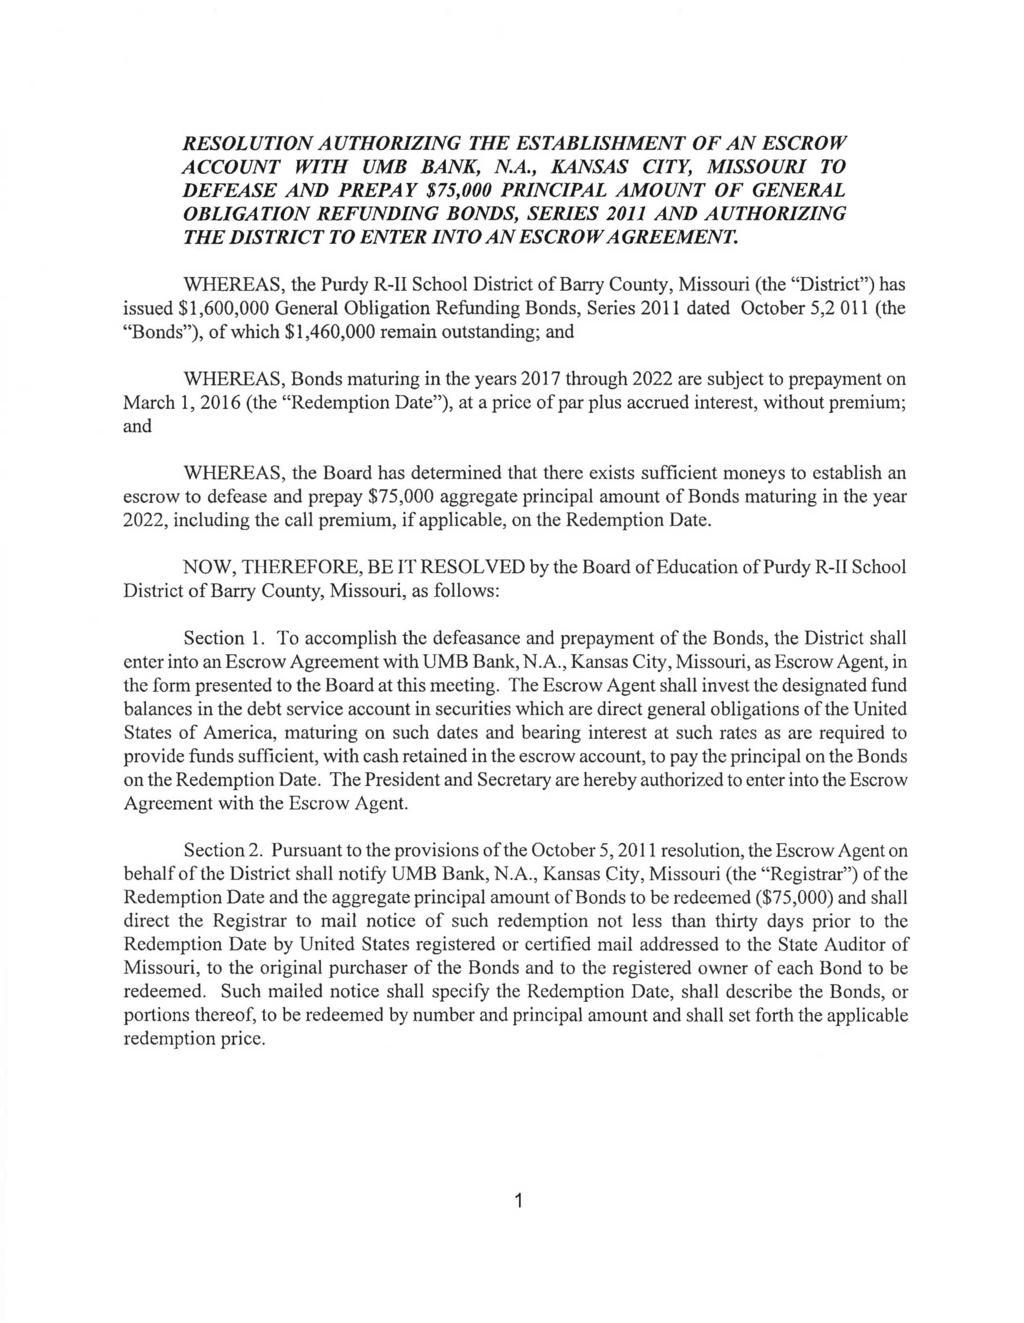 RESOLUTION AUTHORIZING THE ESTABLISHMENT OF AN ESCROW ACCOUNT WITH UMB BANK, N.A., KANSAS CITY, MISSOURI TO DEFEASE AND PREPAY $75,000 PRINCIPAL AMOUNT OF GENERAL OBLIGATION REFUNDING BONDS, SERIES 2011 AND AUTHORIZING THE DISTRICT TO ENTER INTO AN ESCROW AGREEMENT.